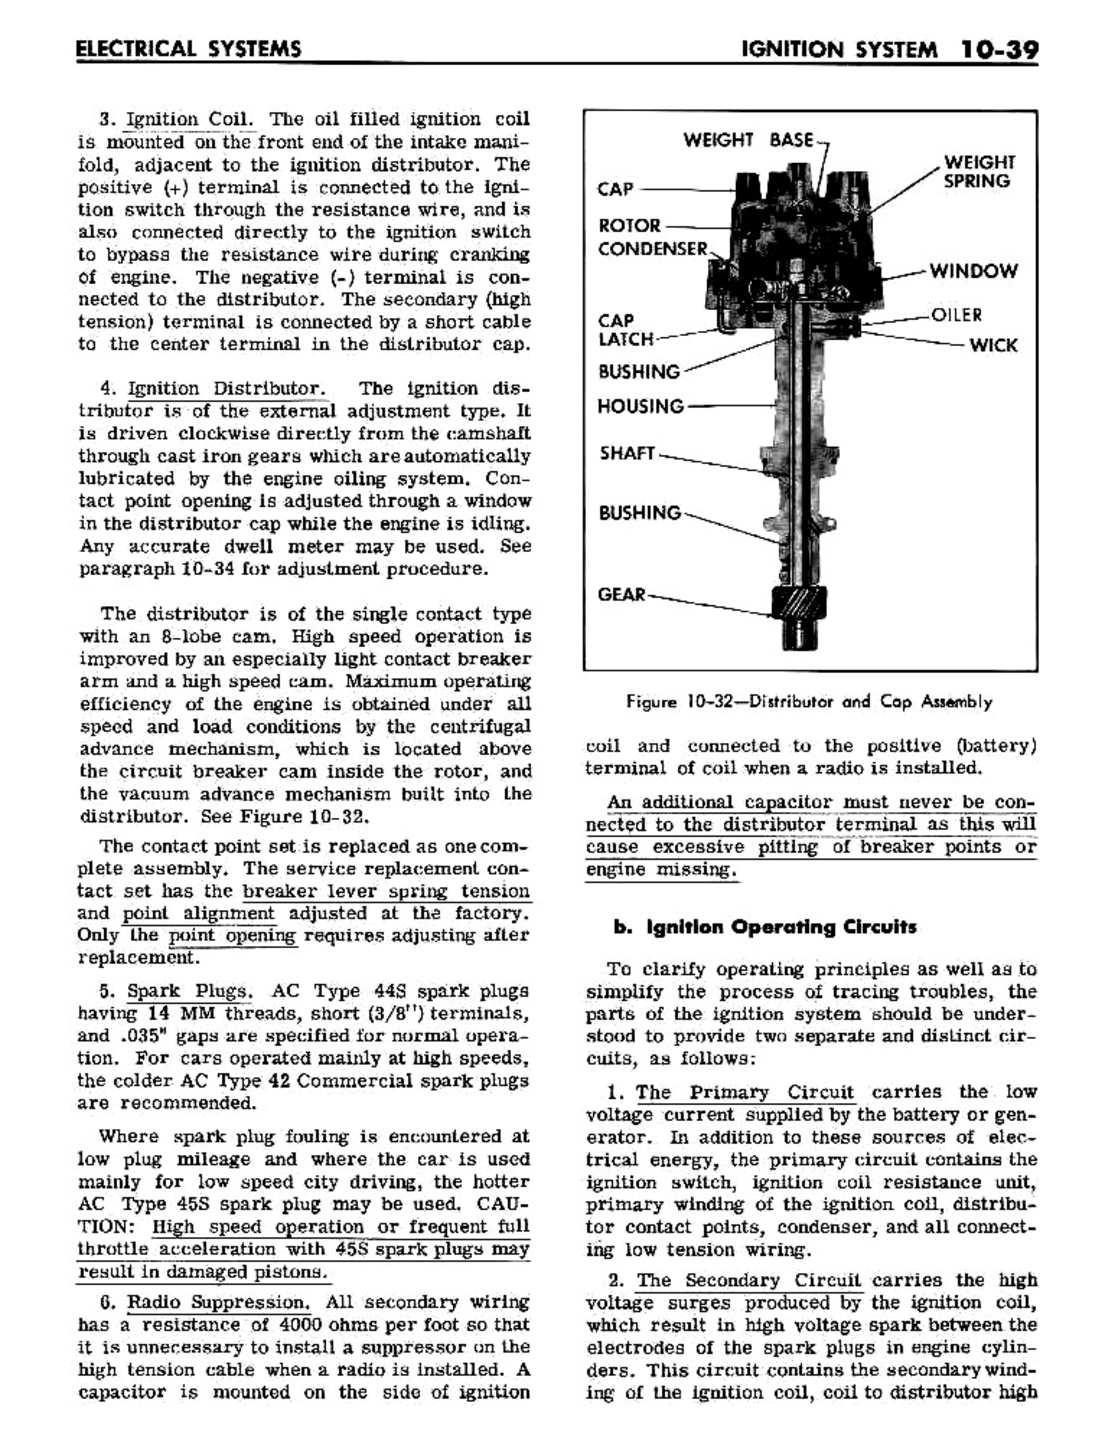 n_10 1961 Buick Shop Manual - Electrical Systems-039-039.jpg